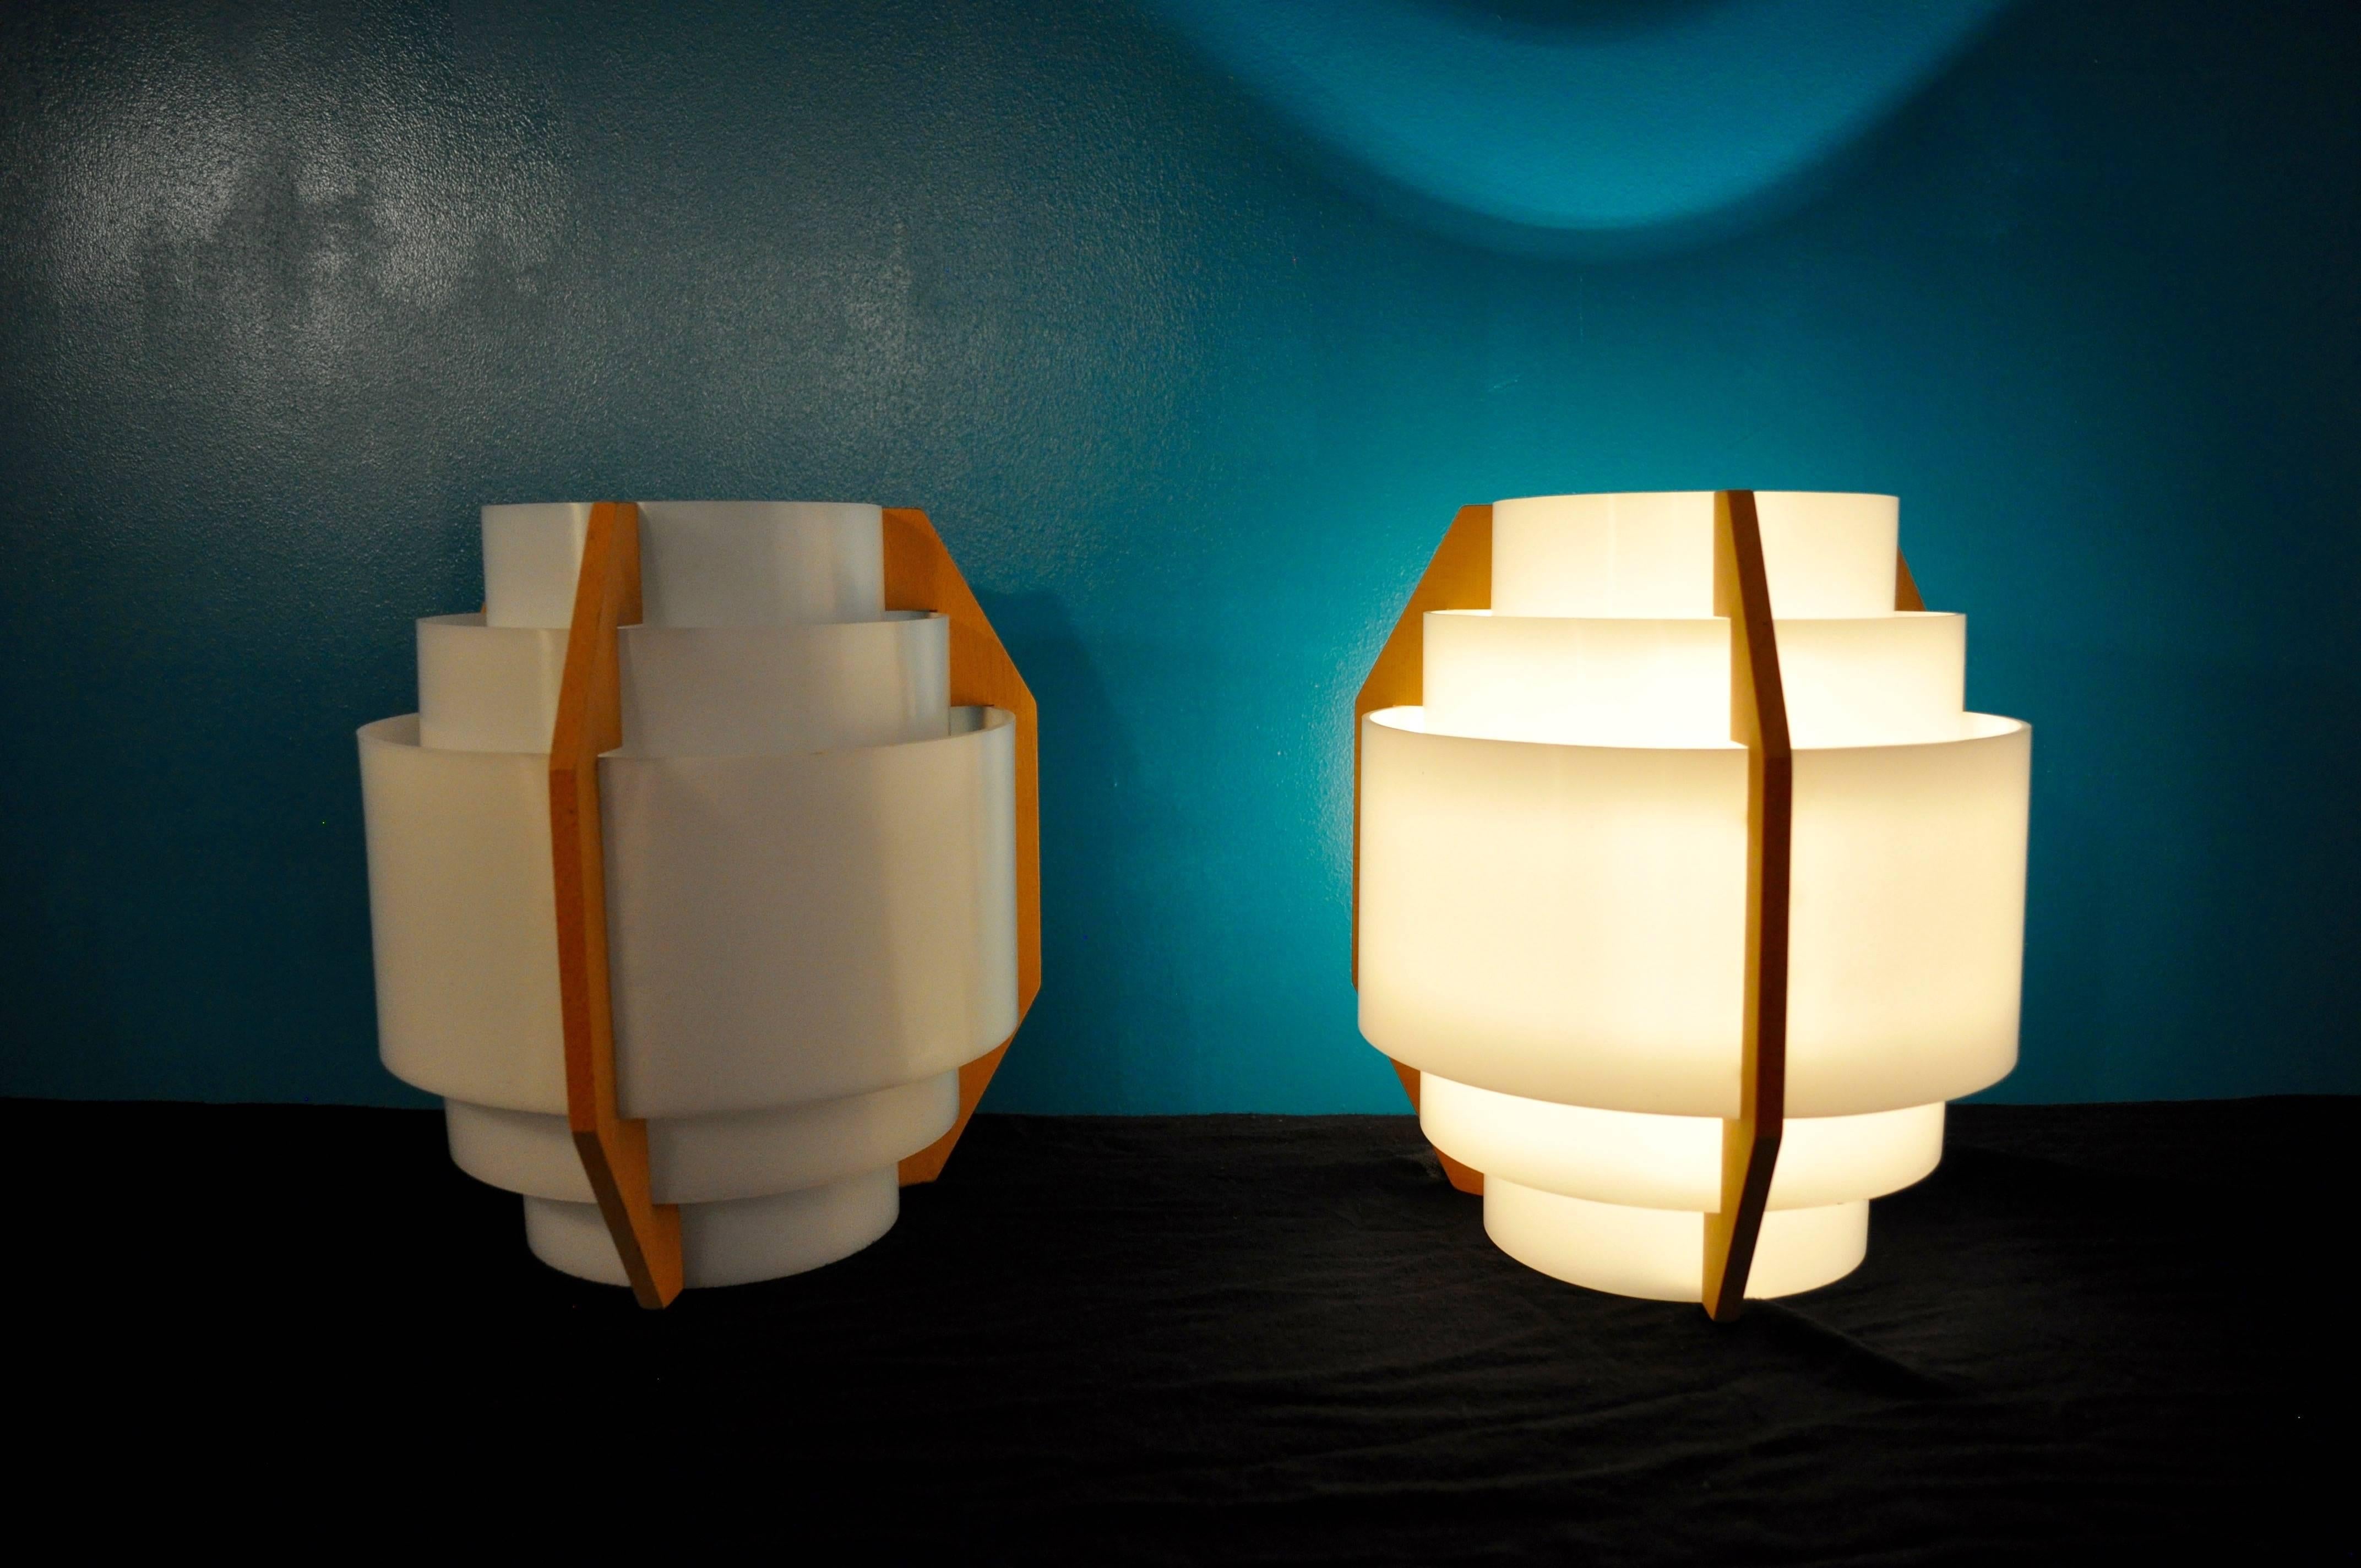 Extremely rare and massive set of wall lamps designed by Hans Agne Jakobsson, V211. This set seems to be a late work of Hans Agne Jakobsson. The mix of material used in this piece is unusual and rare for this designer which makes those pieces